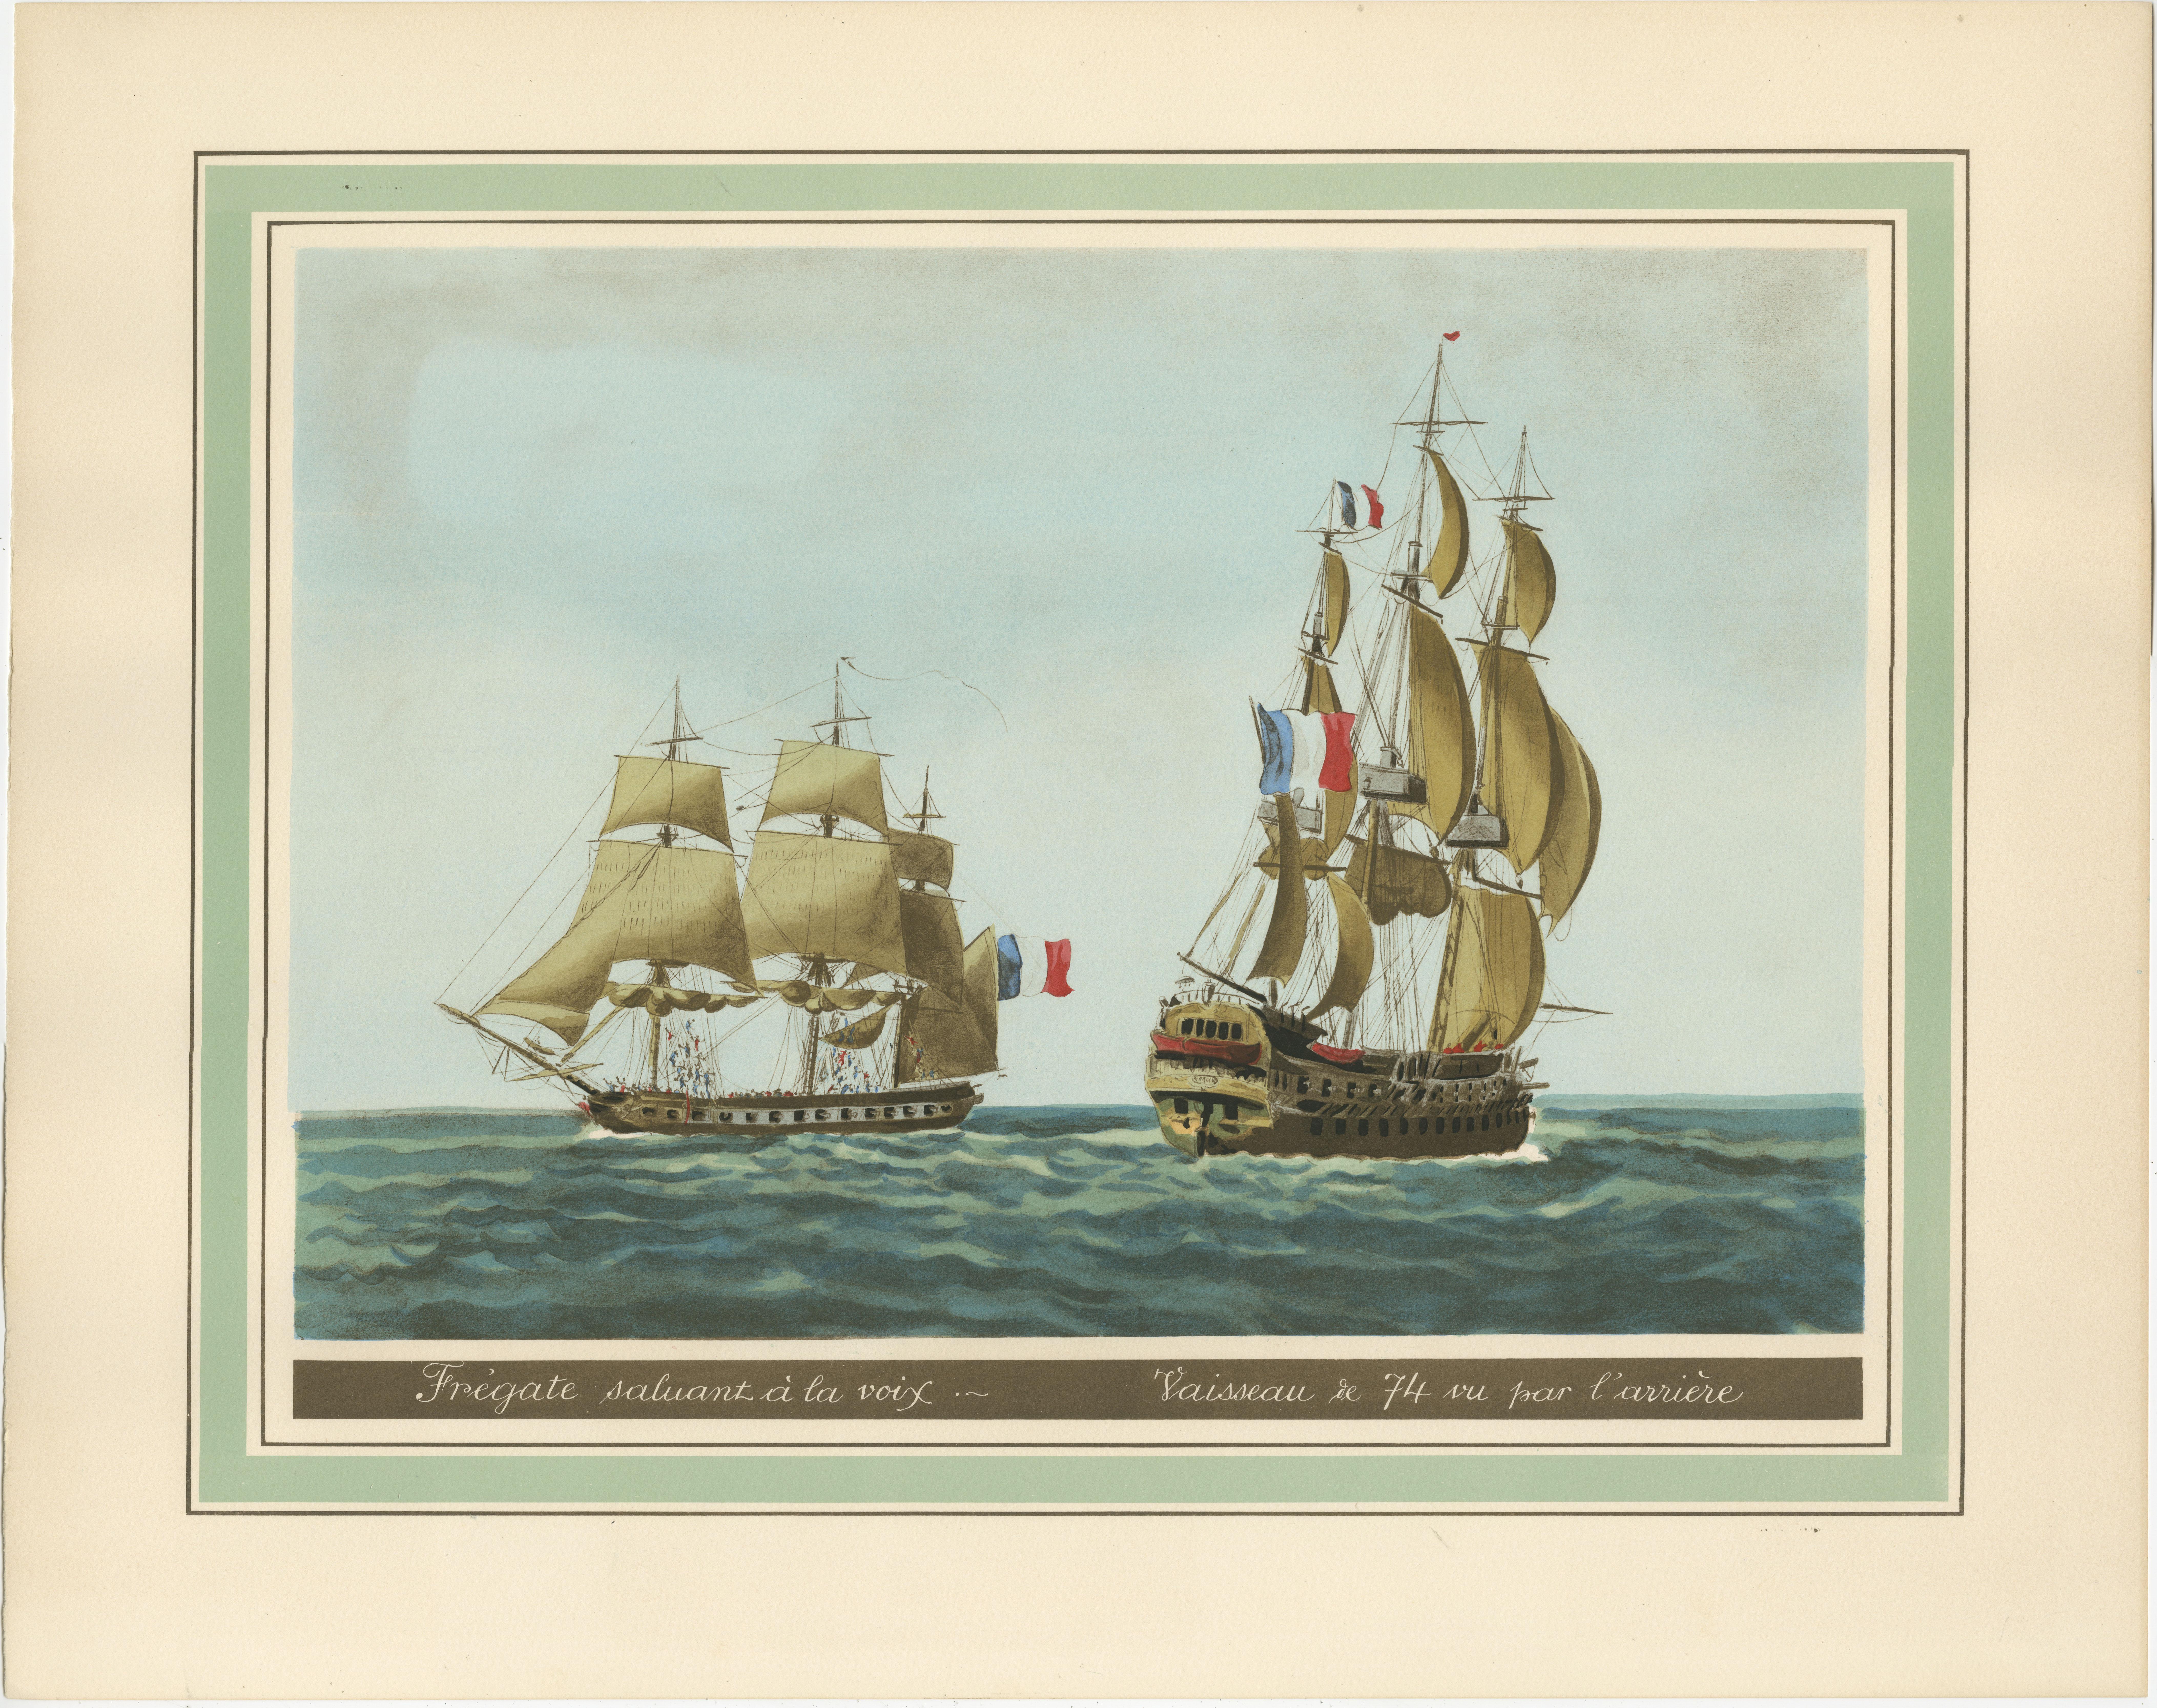 Handcolored heliotype of two French ships after a work of Jean-Jérôme Baugean, created in circa 1920.

This original print is described as a handcolored heliotype, a technique that was developed in the 19th century as a photo-mechanical process. It